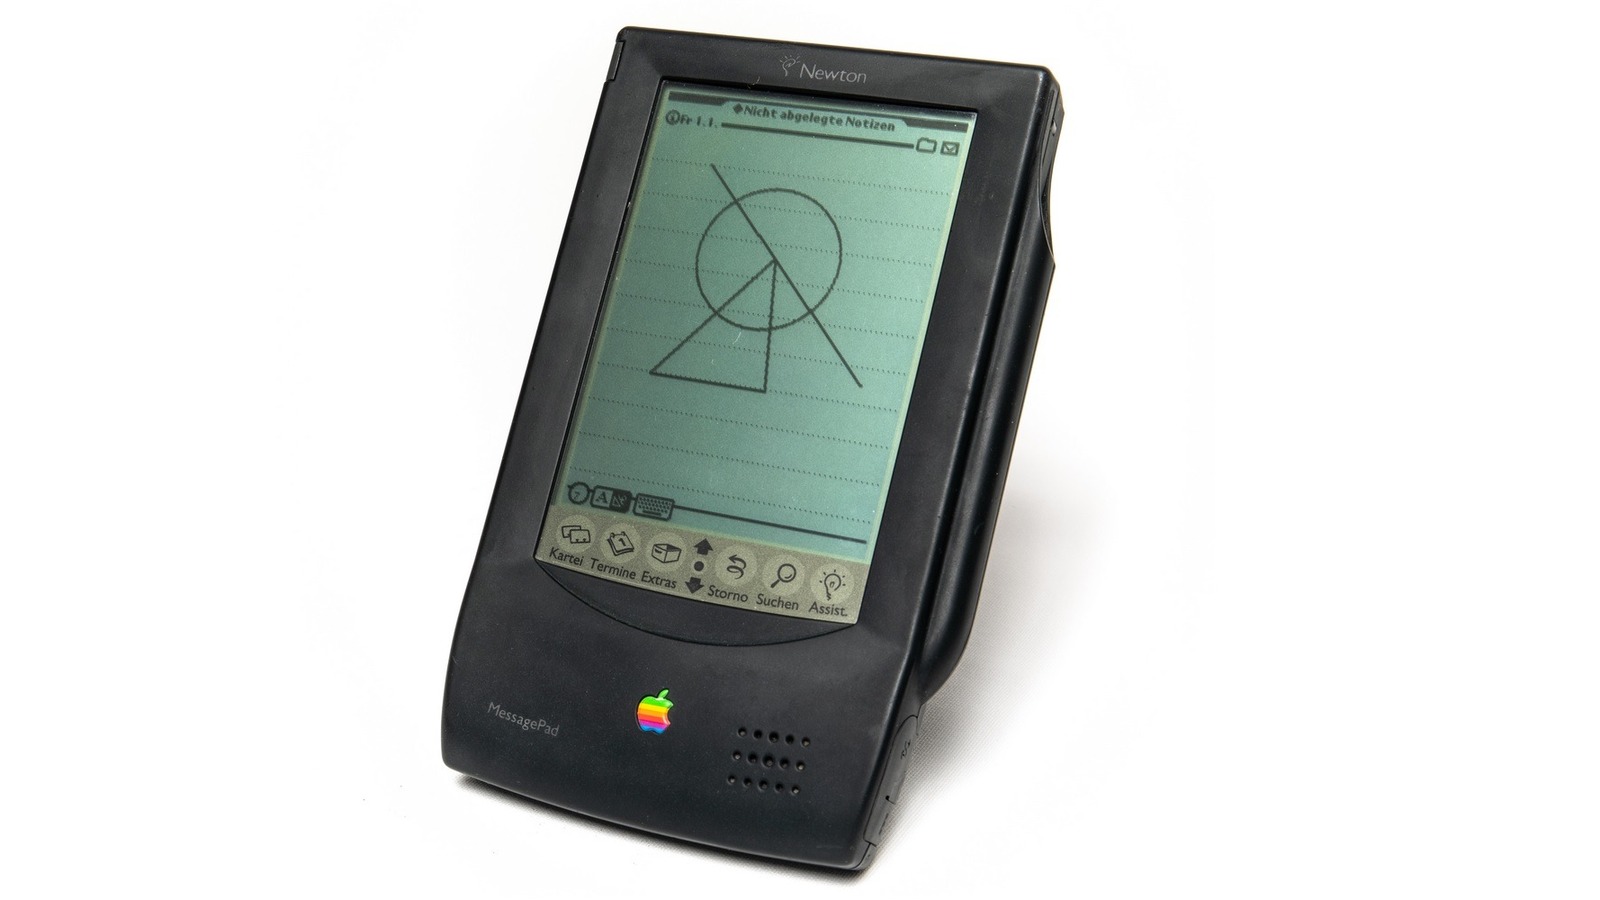 How The Apple Newton’s Failure Led To The iPhone